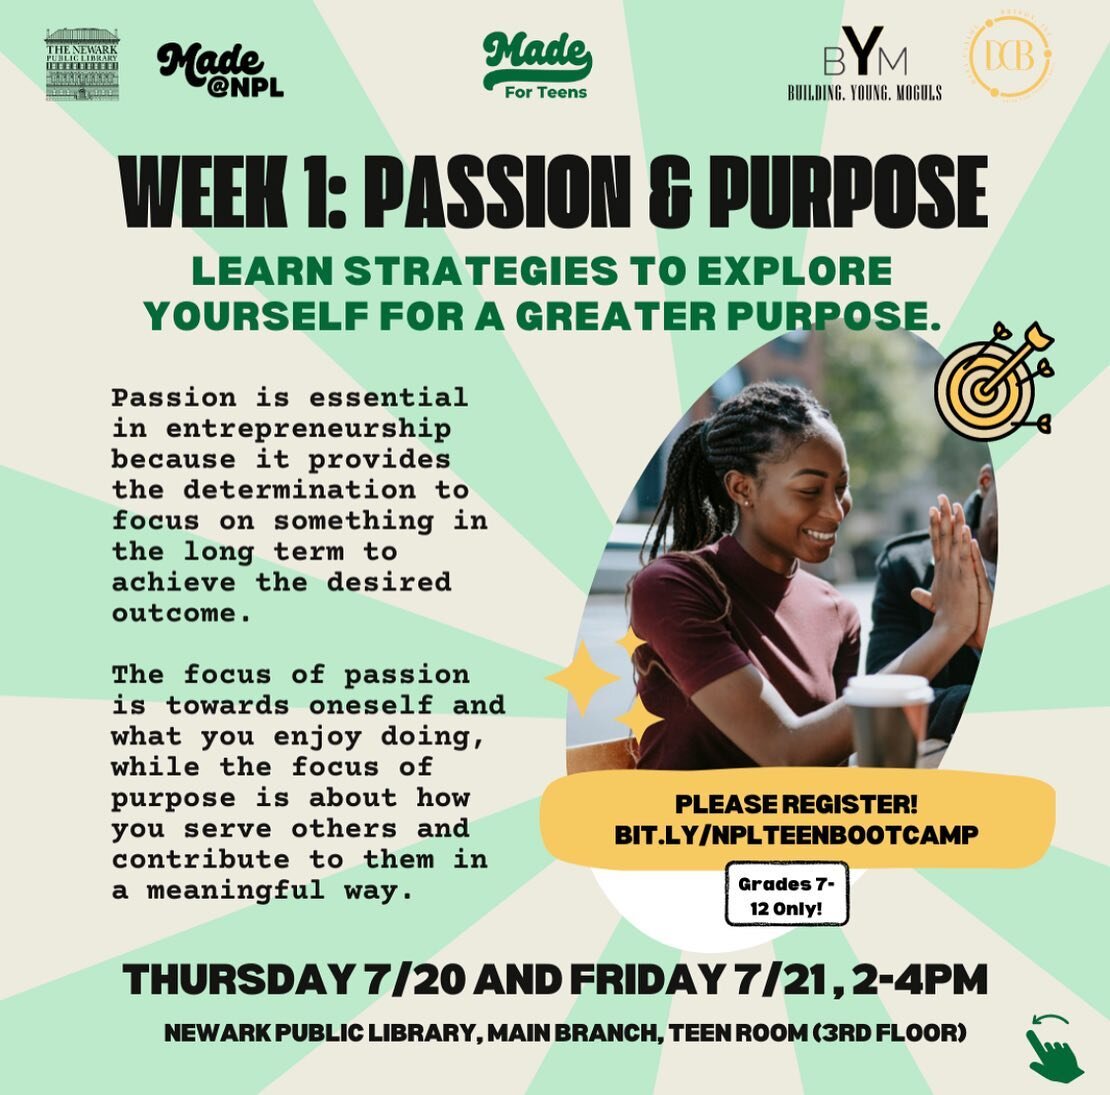 ✨Find your Passion, Live your Purpose ✨

Join us for week 1 of &ldquo;From &lsquo;0 to CEO&rsquo; Summer Teen Entrepreneurship Bootcamp&rdquo; on Thursday 7/20 and Friday 7/21 from 2-4pm (Grades 7-12).

Passion is essential in entrepreneurship becaus